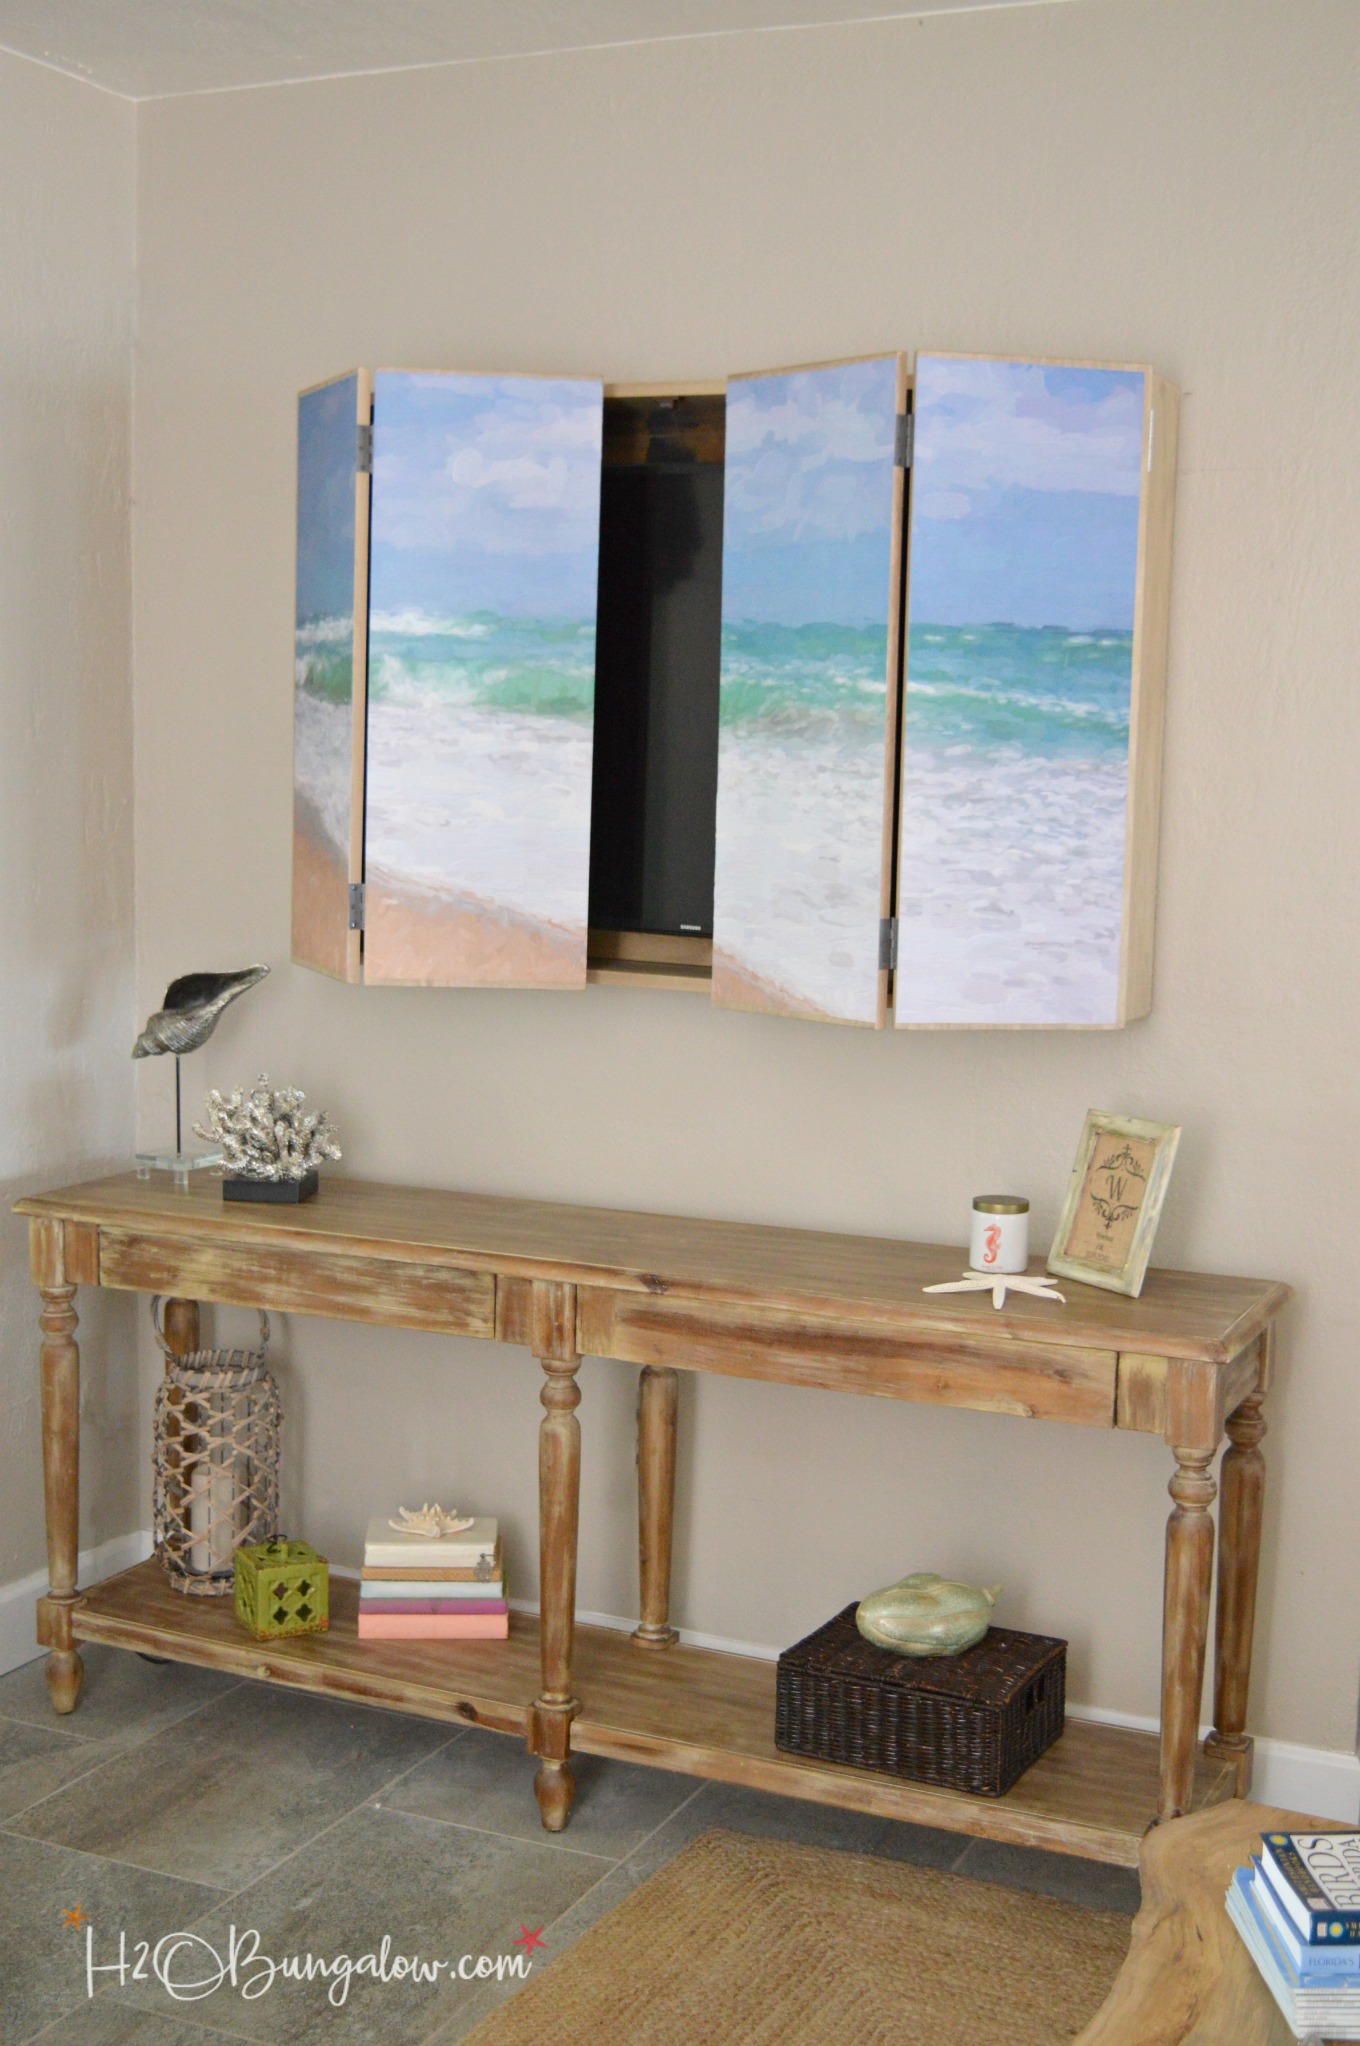 DIY Wall Mounted TV Cabinet With Free Plans H20Bungalow